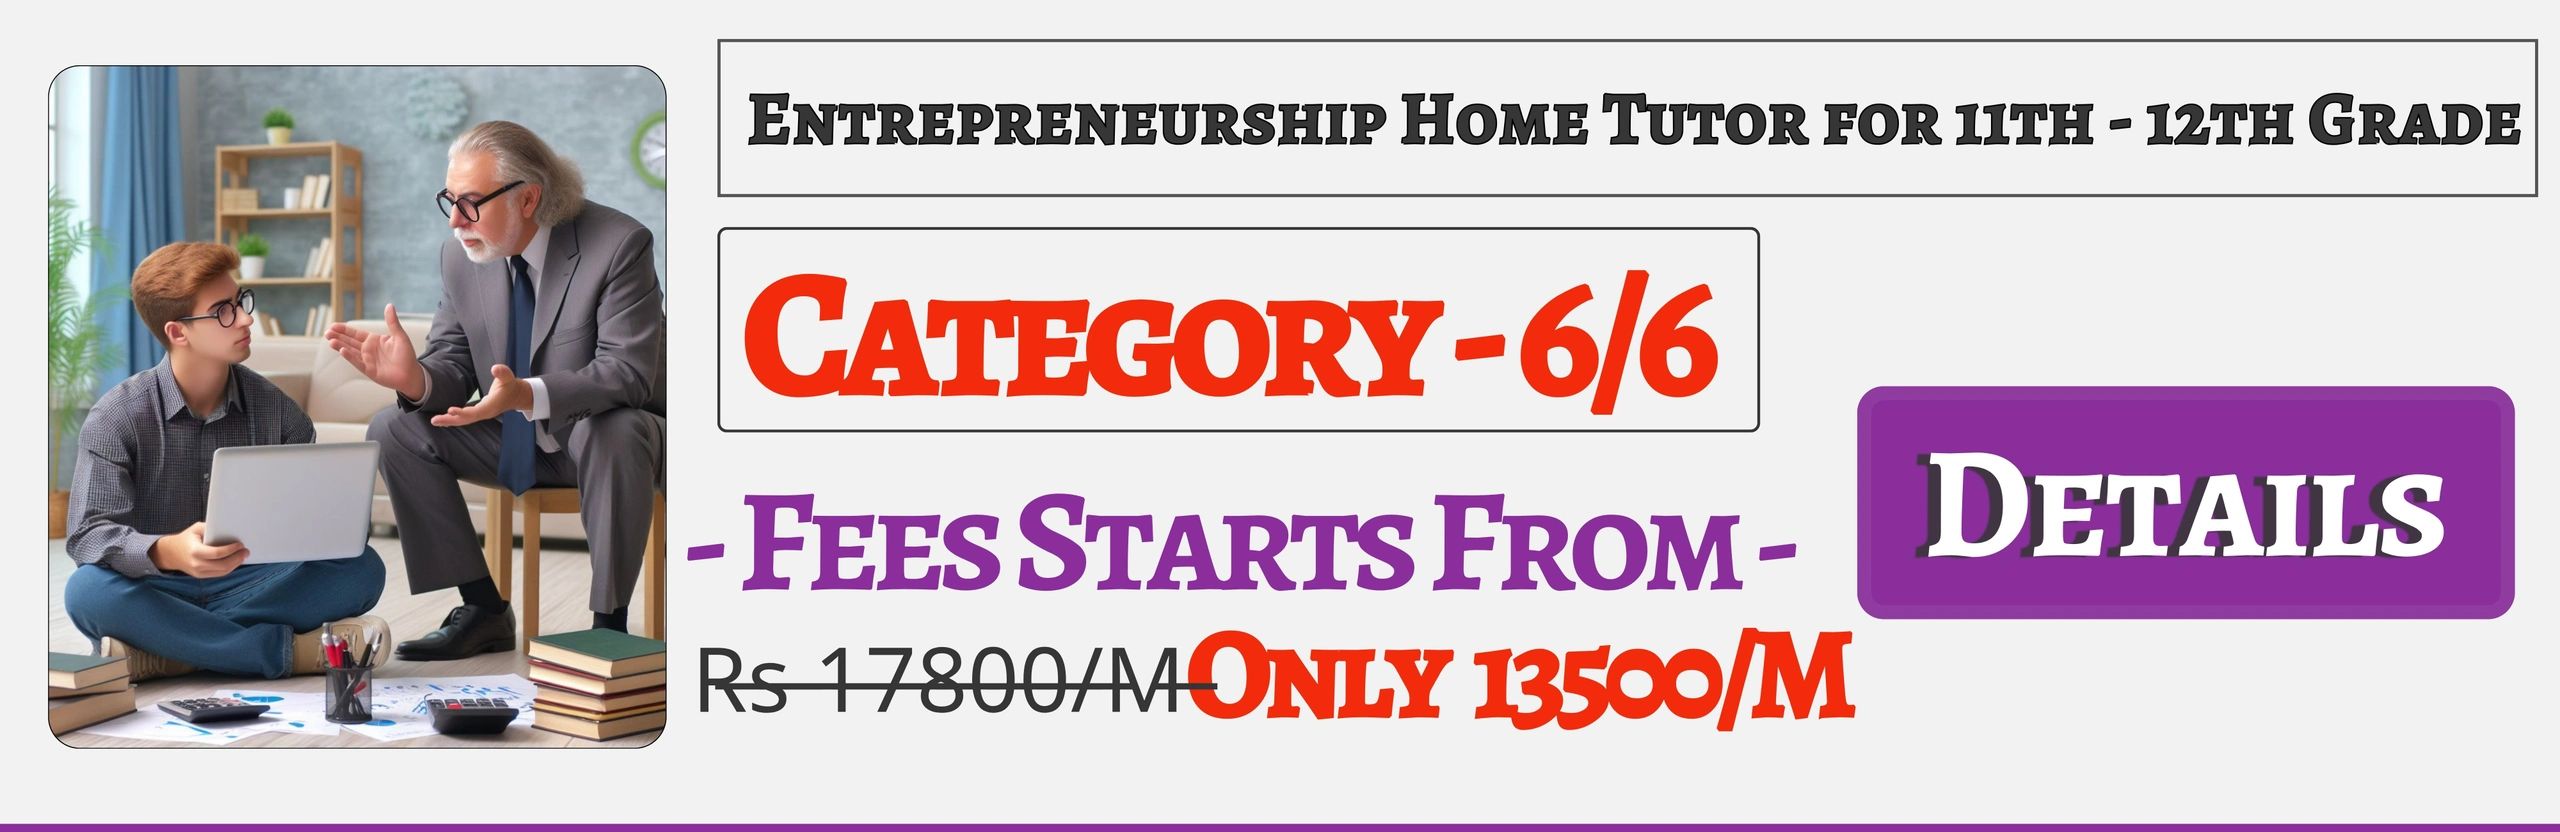 Book Best Nearby Entrepreneurship Home Tuition Tutors For 11th & 12th In Jaipur , Fees Only 13500/M